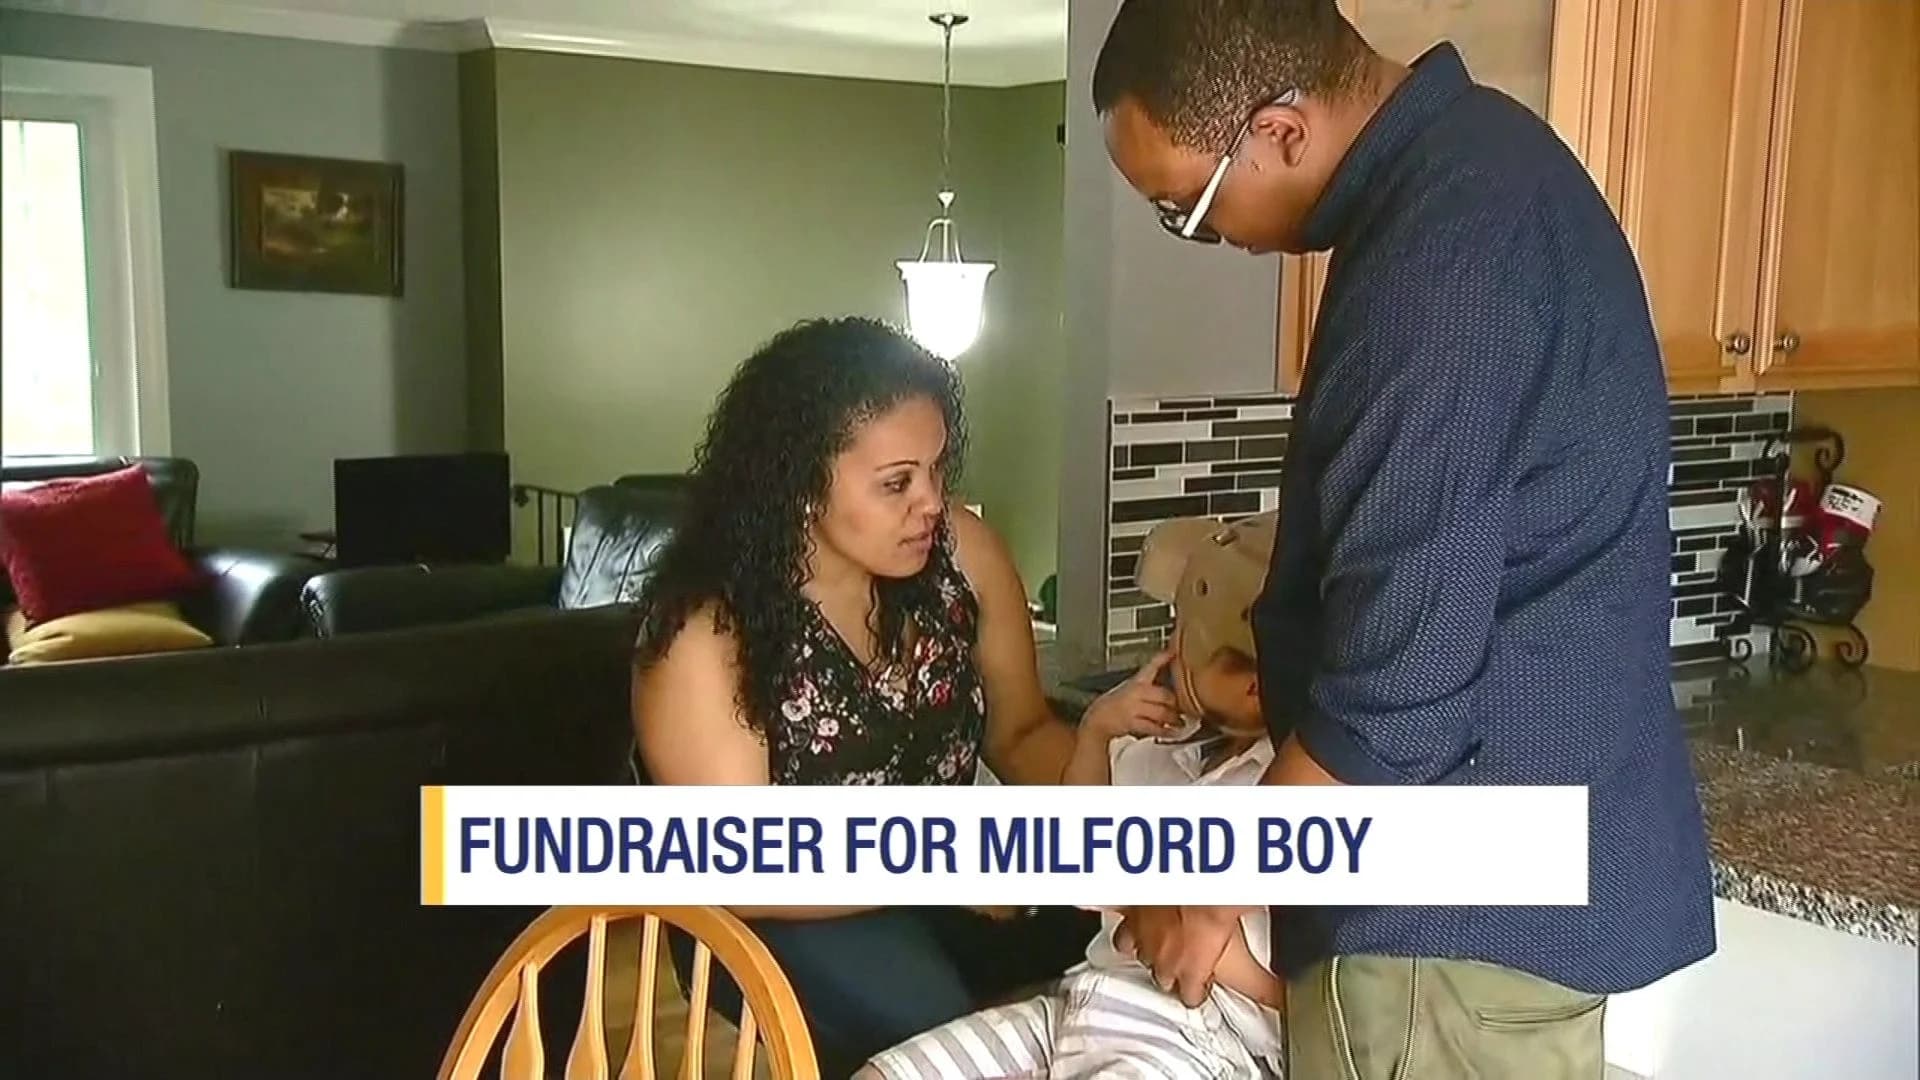 Milford couple seeks funds for special needs child